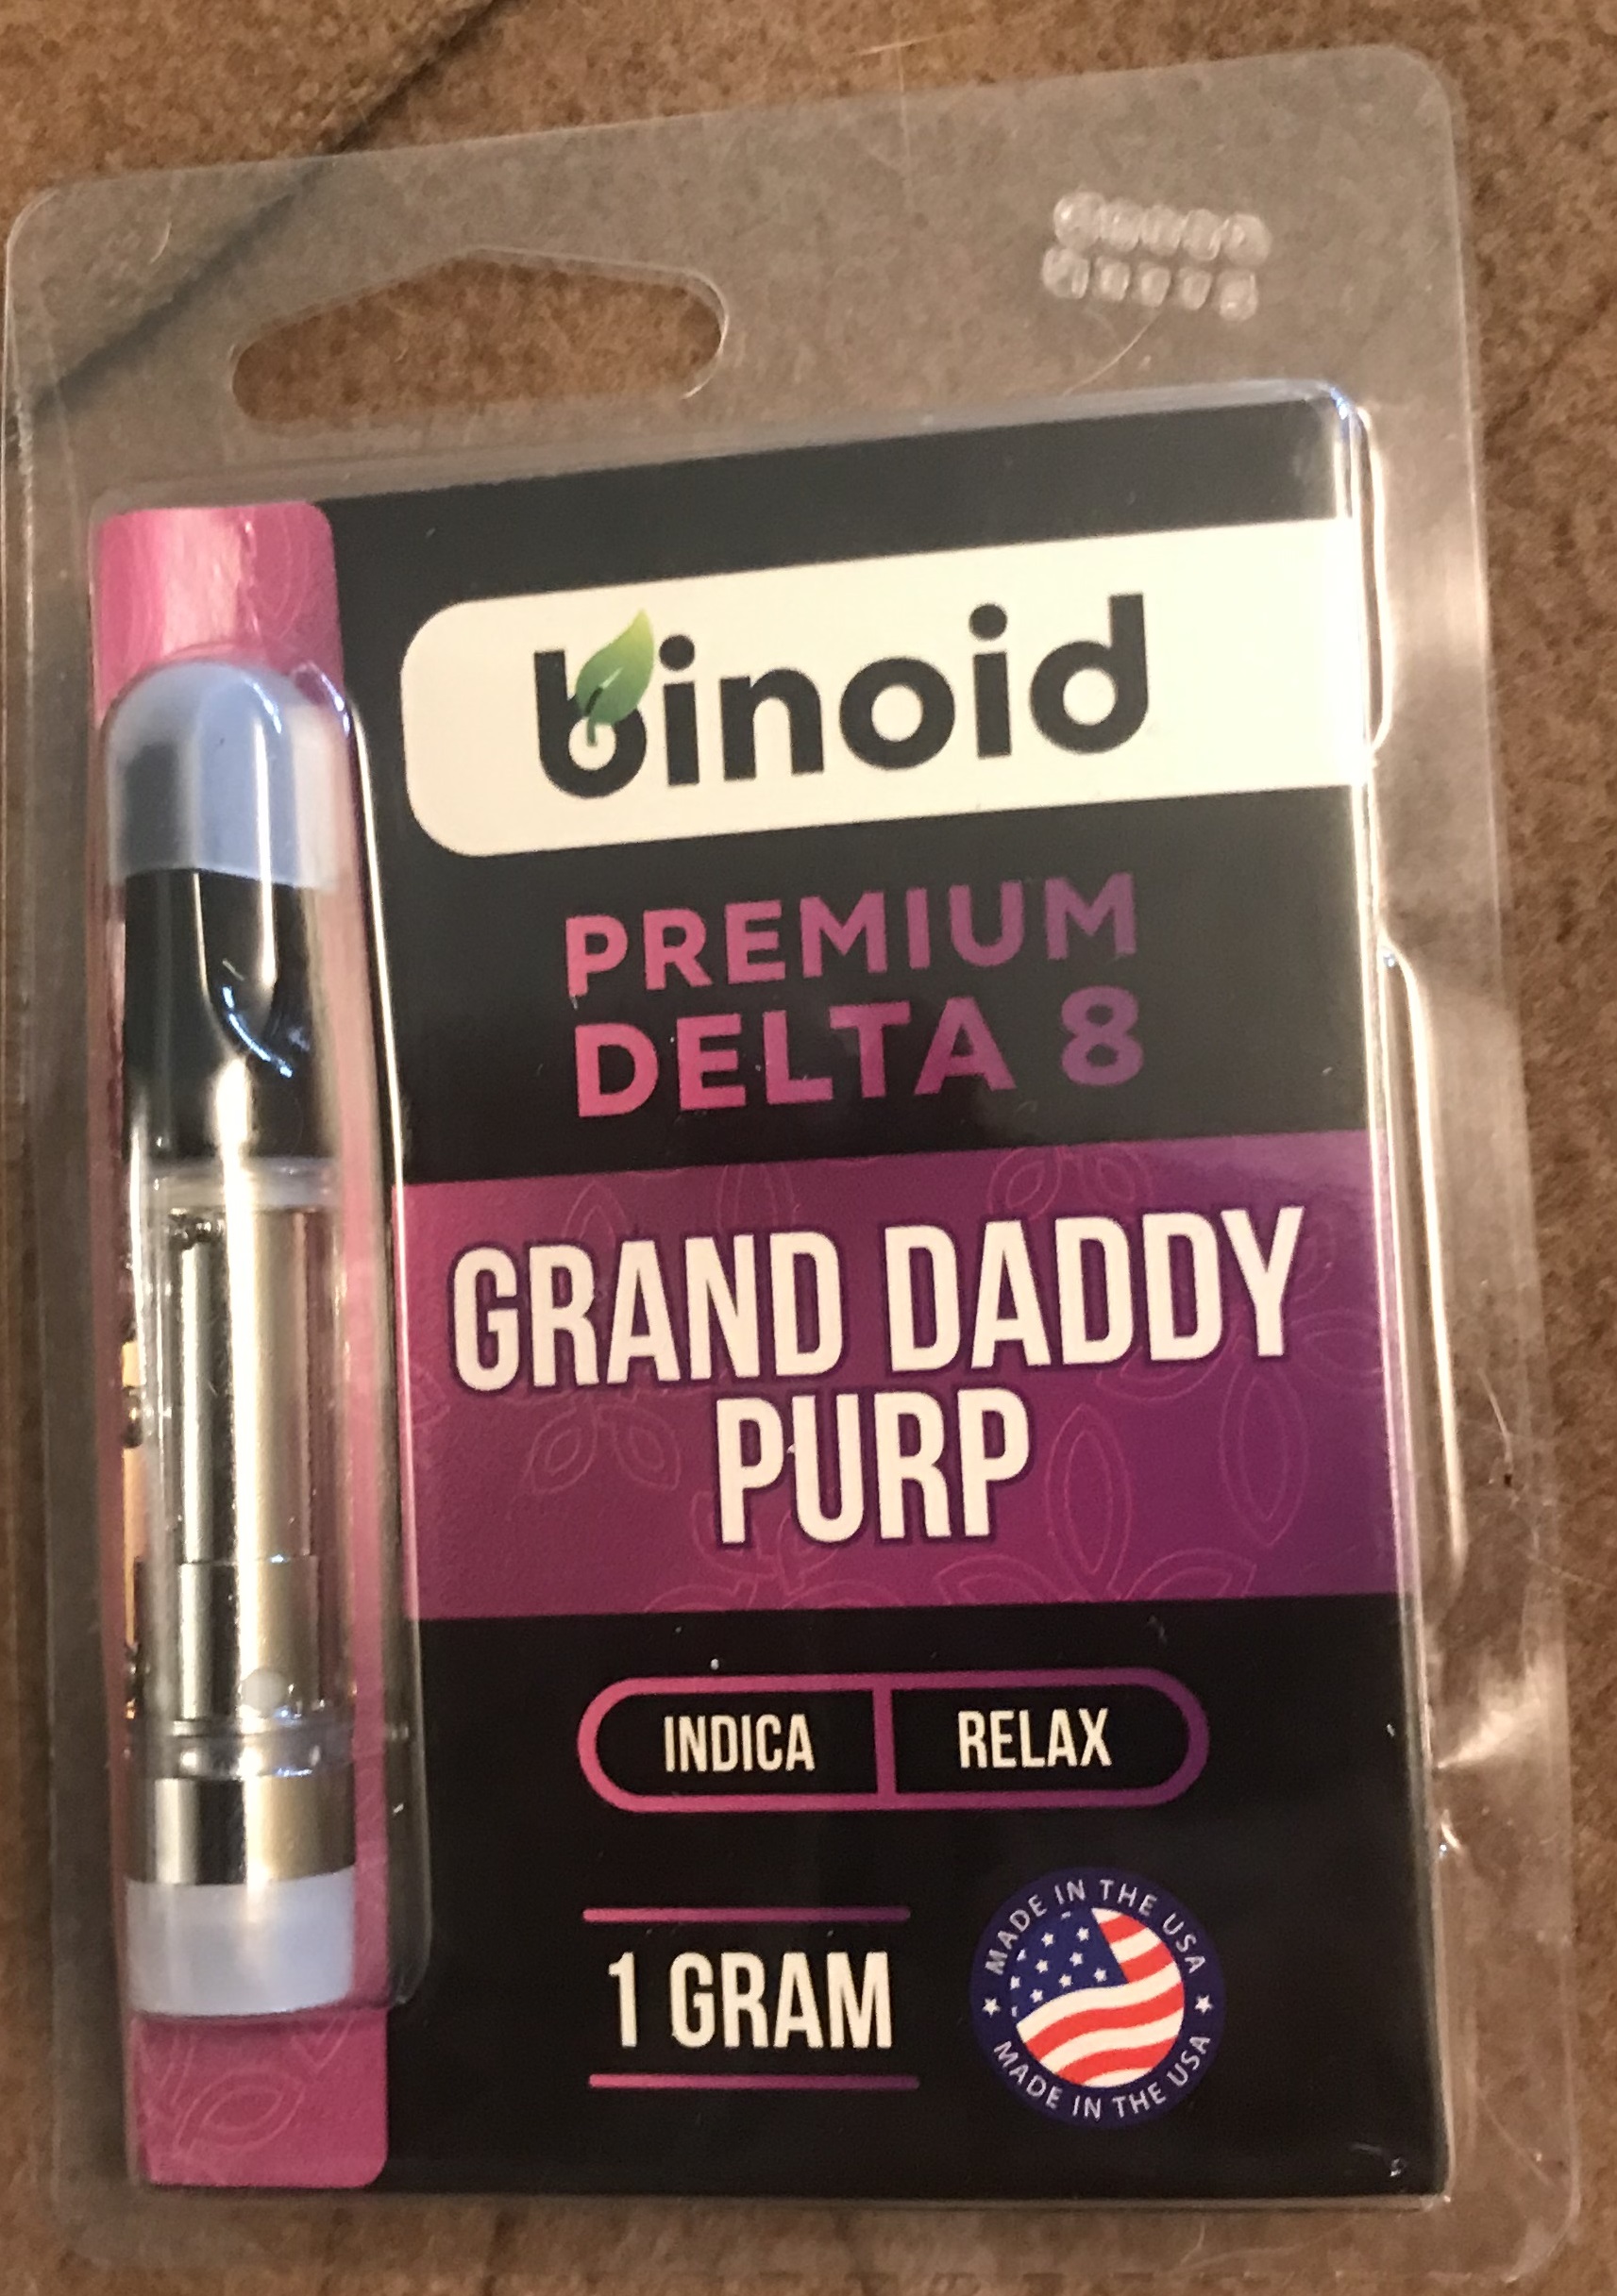 Cake Delta 8 Cartridges - Products|Thc|Hemp|Brand|Gummies|Product|Delta-8|Cbd|Origin|Cannabis|Delta|Users|Effects|Cartridges|Brands|Range|List|Research|Usasource|Options|Benefits|Plant|Companies|Vape|Source|Results|Gummy|People|Space|High-Quality|Quality|Place|Overview|Flowers|Lab|Drug|Cannabinoids|Tinctures|Overviewproducts|Cartridge|Delta-8 Thc|Delta-8 Products|Delta-9 Thc|Delta-8 Brands|Usa Source|Delta-8 Thc Products|Cannabis Plant|Federal Level|United States|Delta-8 Gummies|Delta-8 Space|Health Canada|Delta Products|Delta-8 Thc Gummies|Delta-8 Companies|Vape Cartridges|Similar Benefits|Hemp Doctor|Brand Overviewproducts|Drug Test|High-Quality Products|Organic Hemp|San Jose|Editorial Team|Farm Bill|Overview Products|Wide Range|Psychoactive Properties|Reliable Provider|Boston Hempire